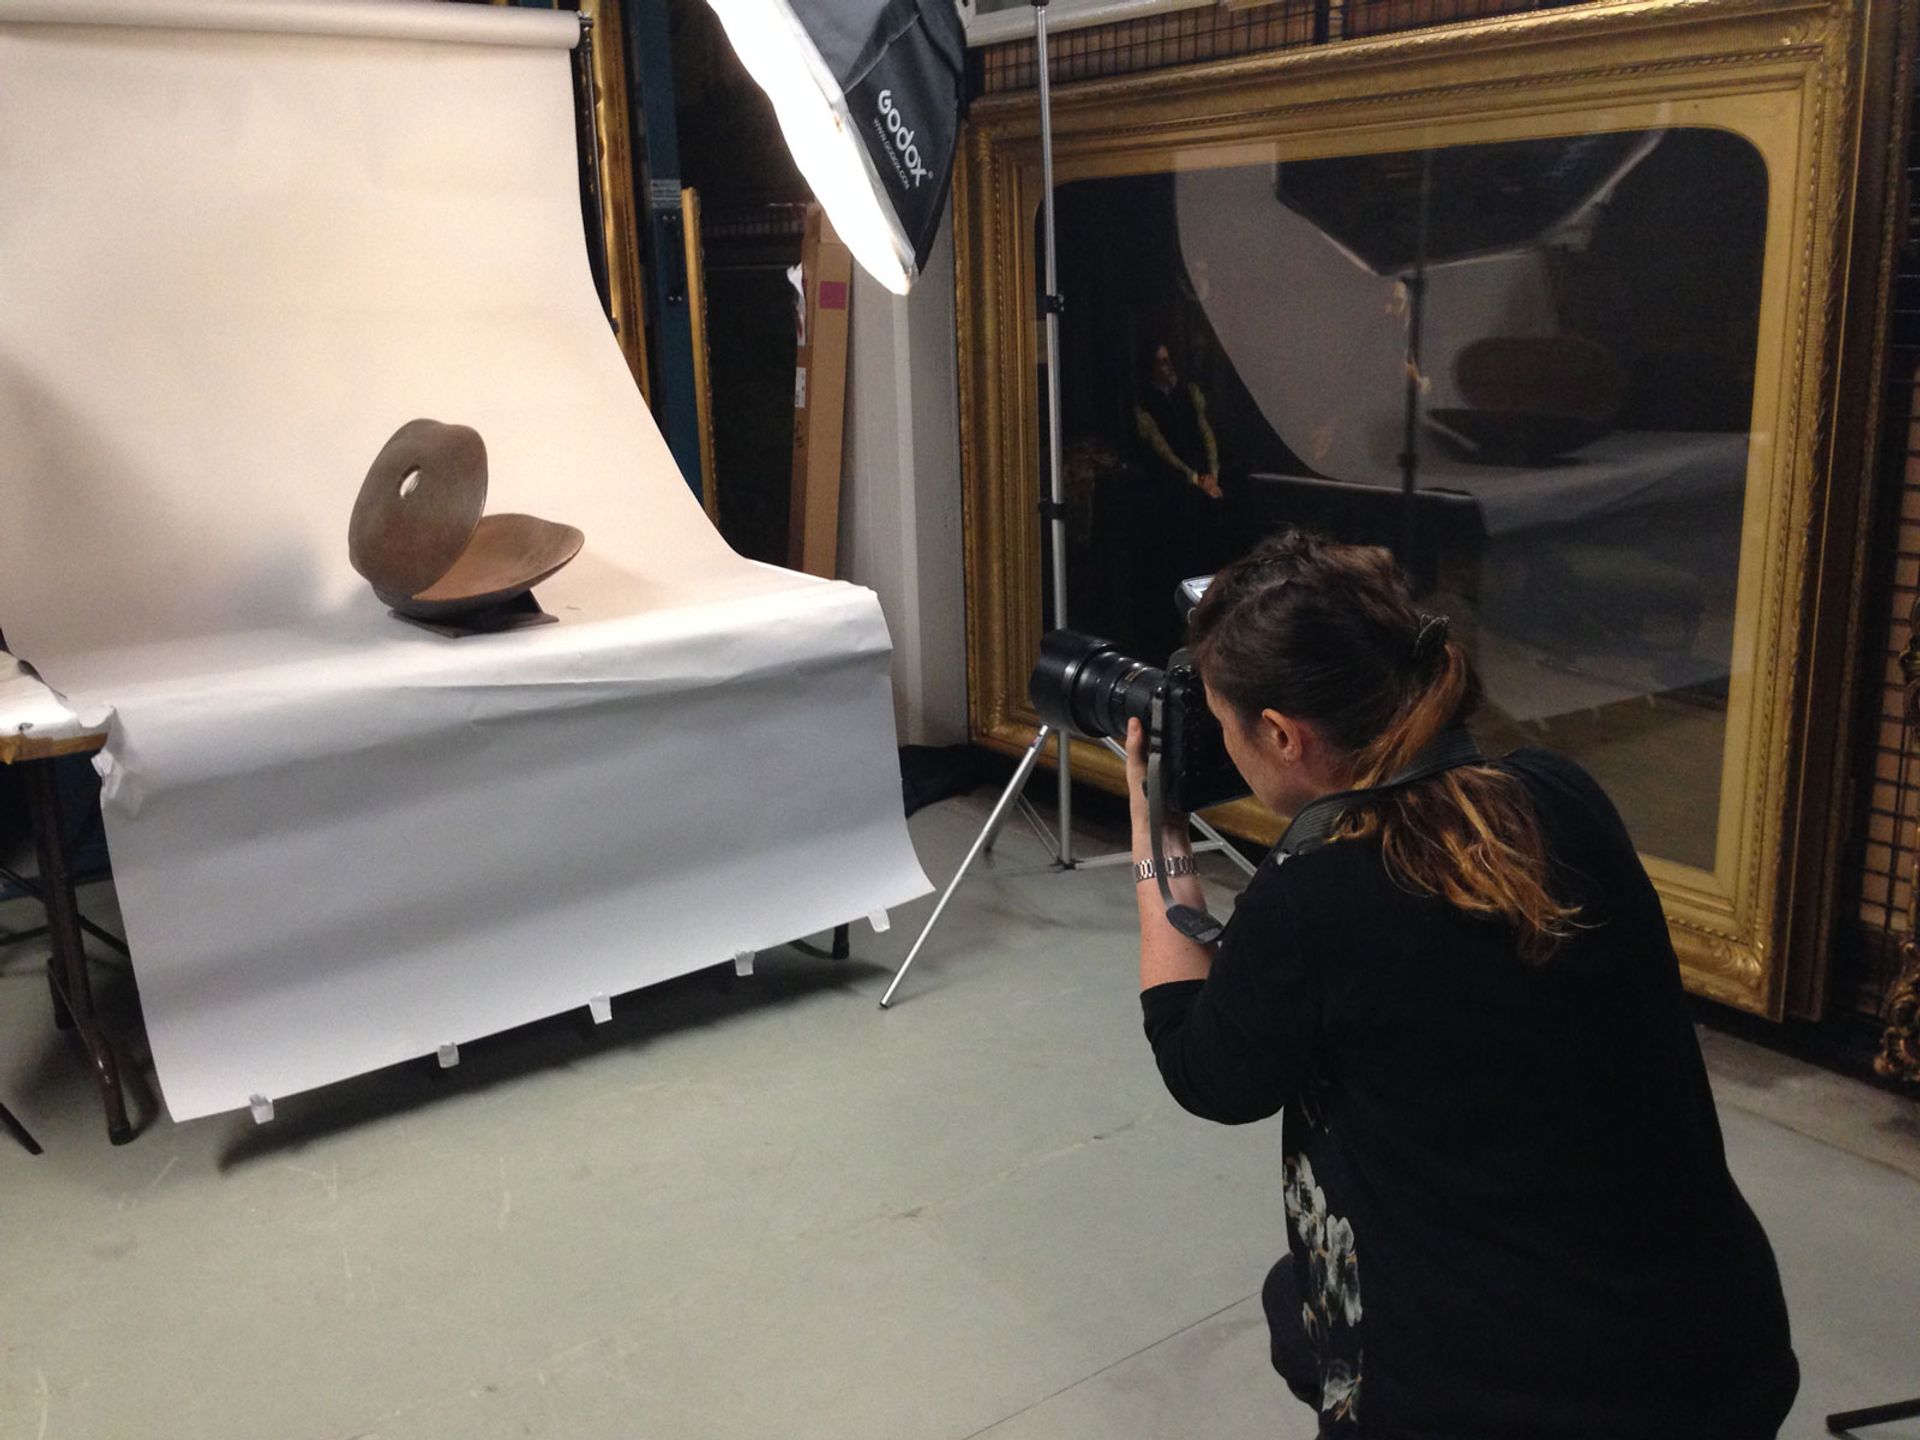 Sculptures at Perth Museum and Art Gallery being photographed for Art UK's sculpture project © Sophia Sheppard/Art UK